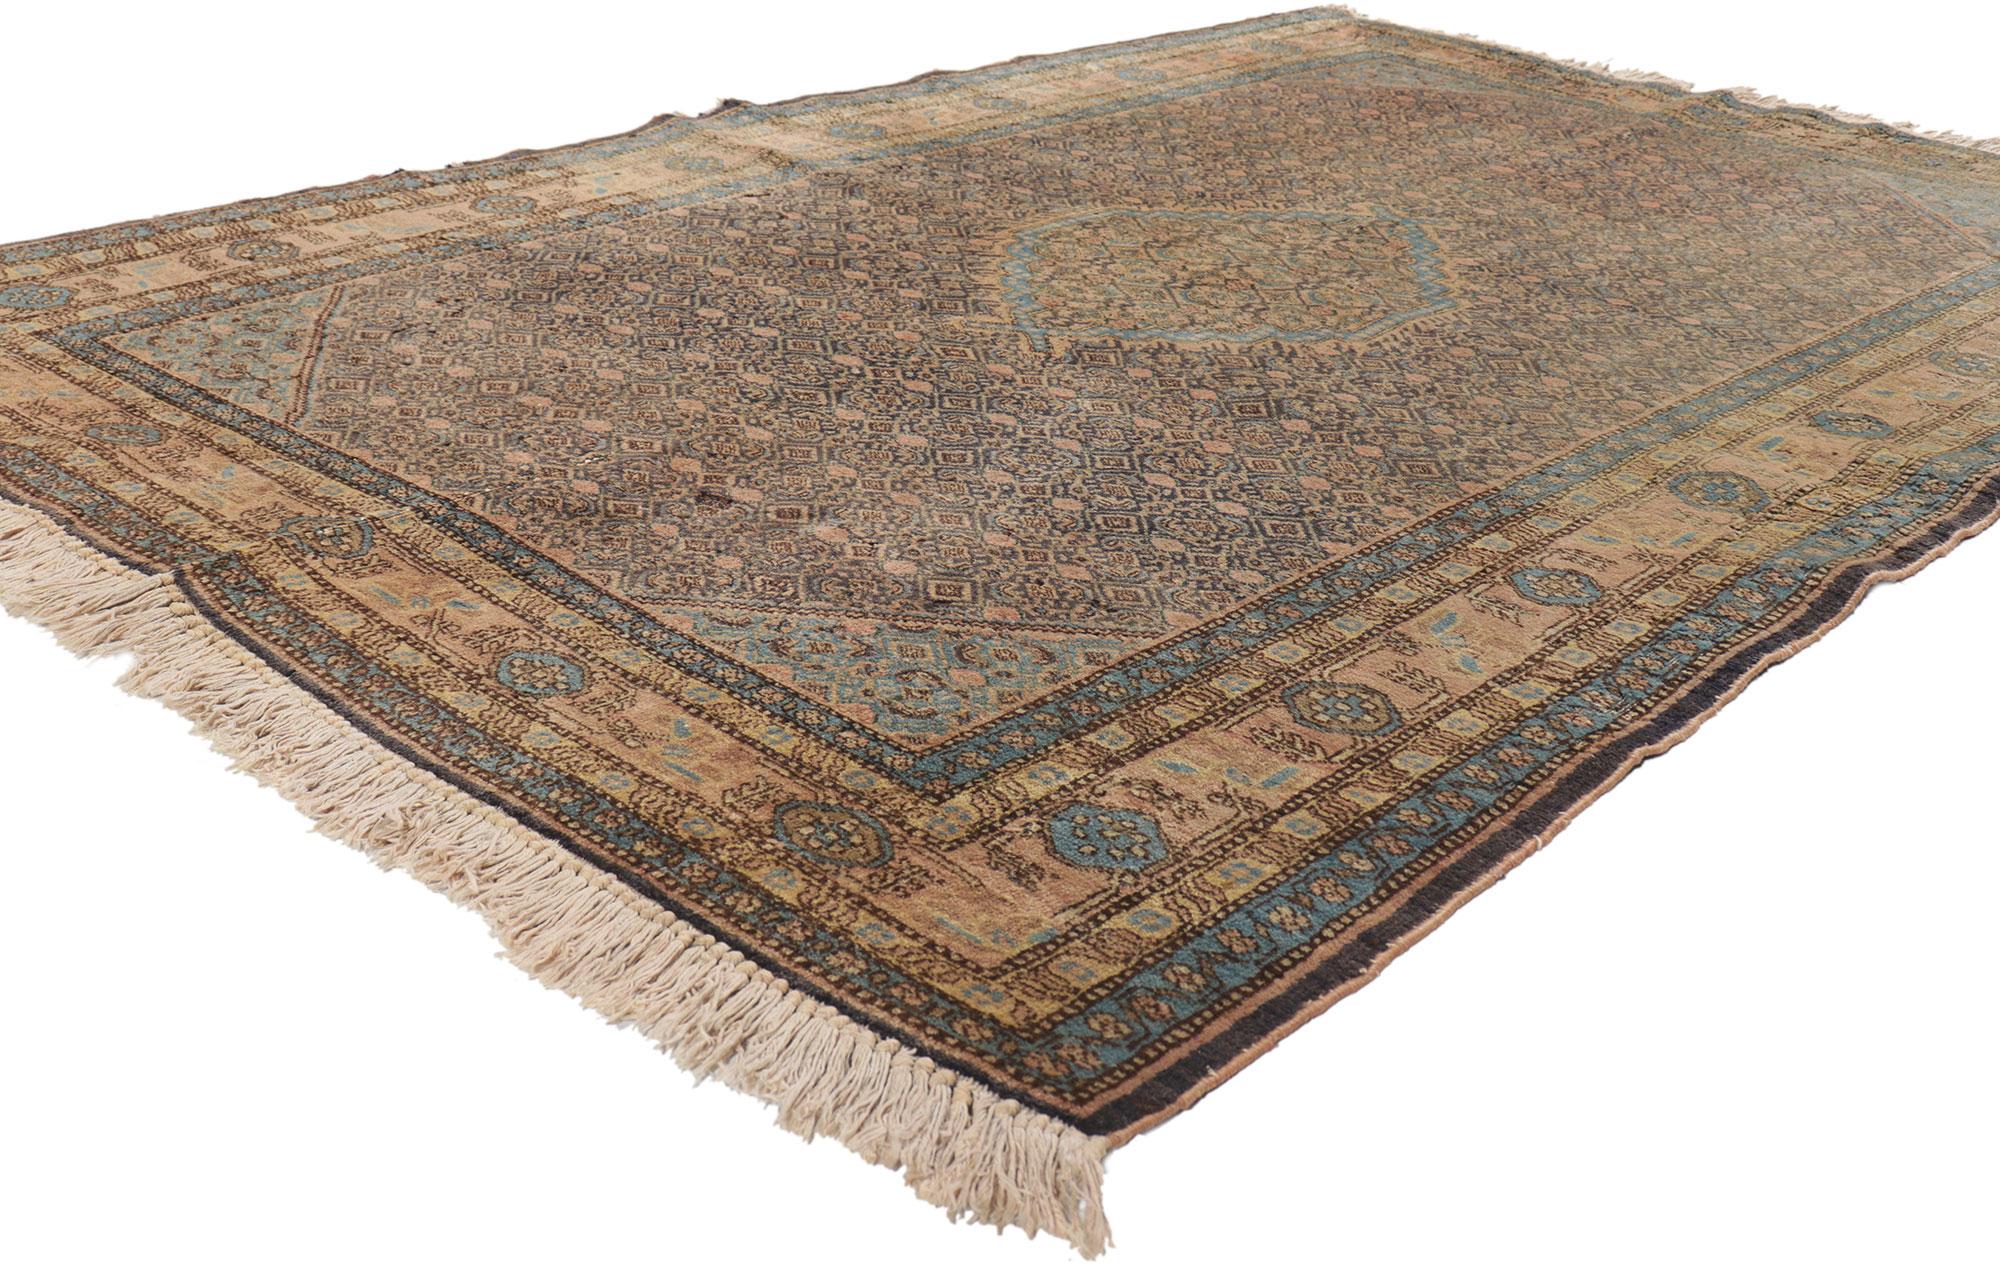 21682 Vintage Persian Ardabil rug 04'07 x 06'05.
Emanating timeless style with incredible detail and texture, this hand knotted wool vintage Persian Ardabil rug is a captivating vision of woven beauty. The eye-catching Herati design and